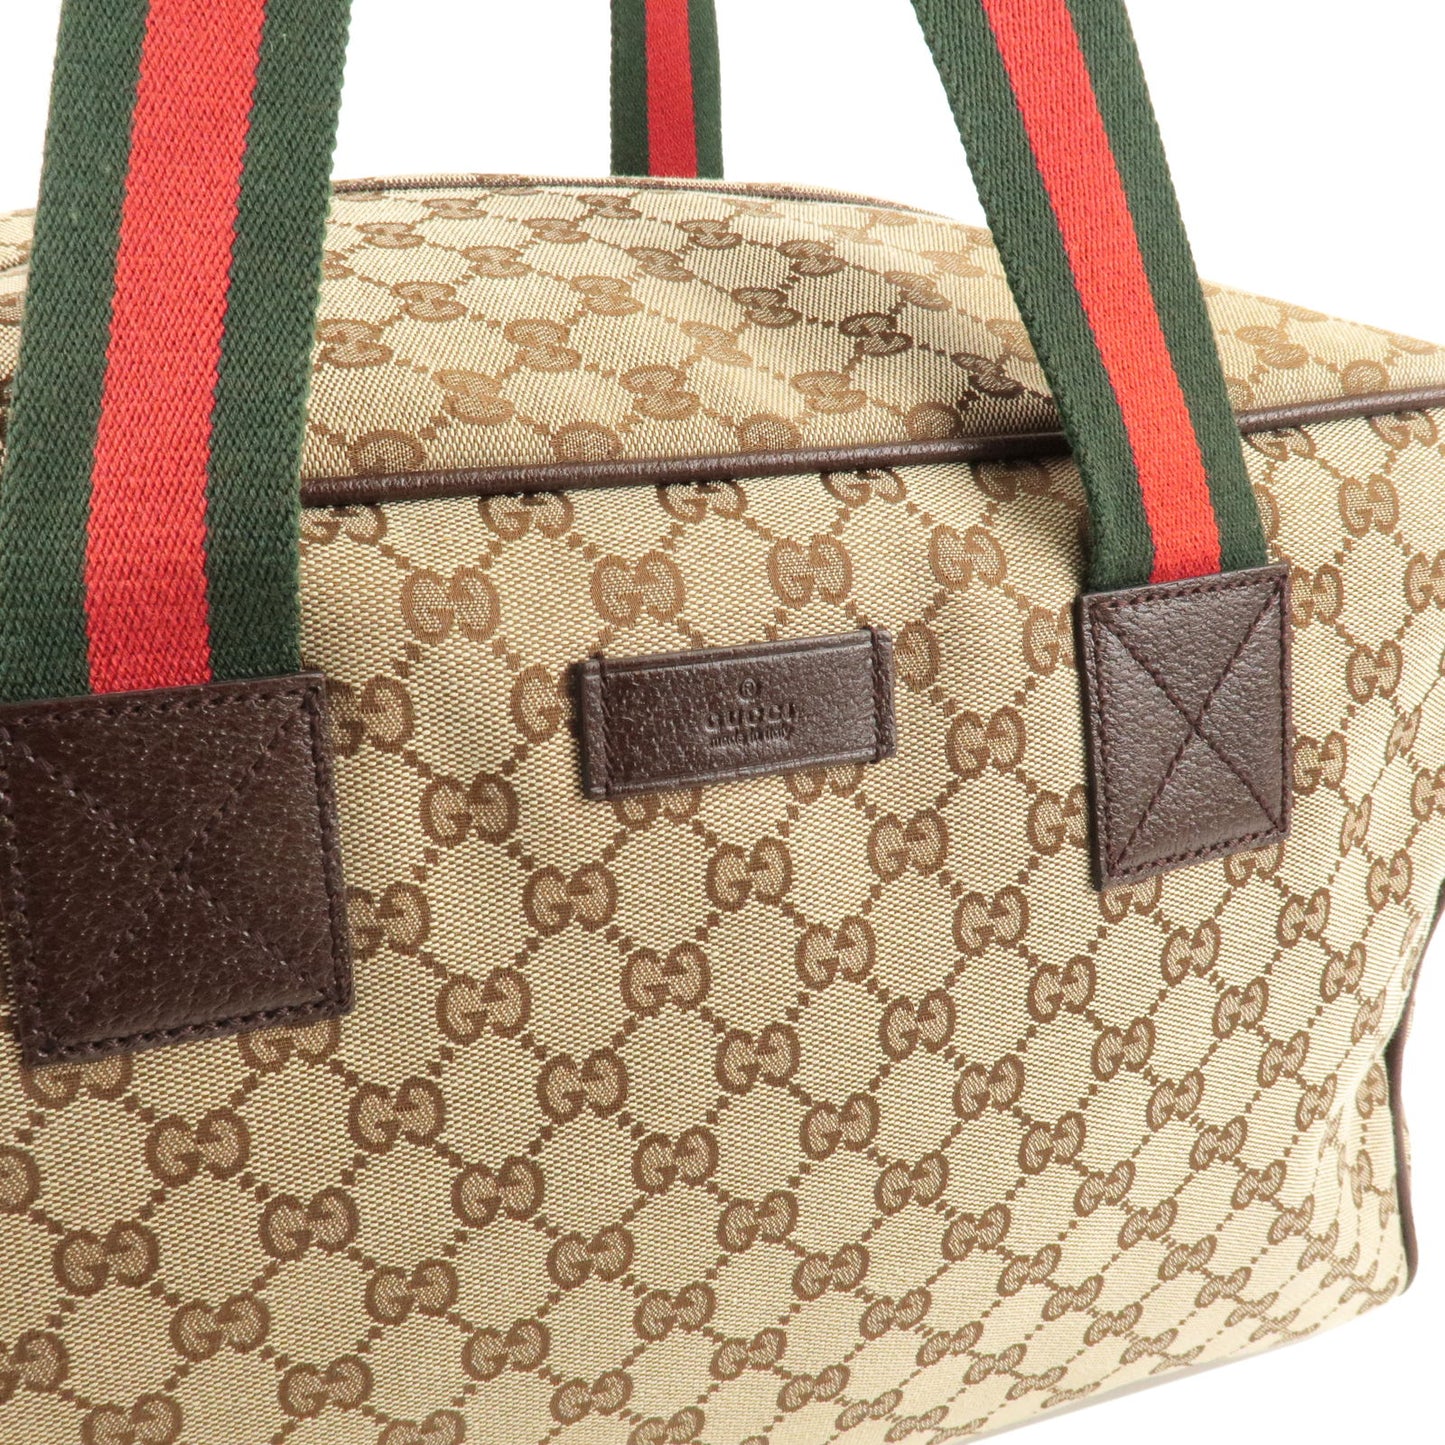 GUCCI Sherry Line GG Canvas Leather Boston Bag Beige 153240